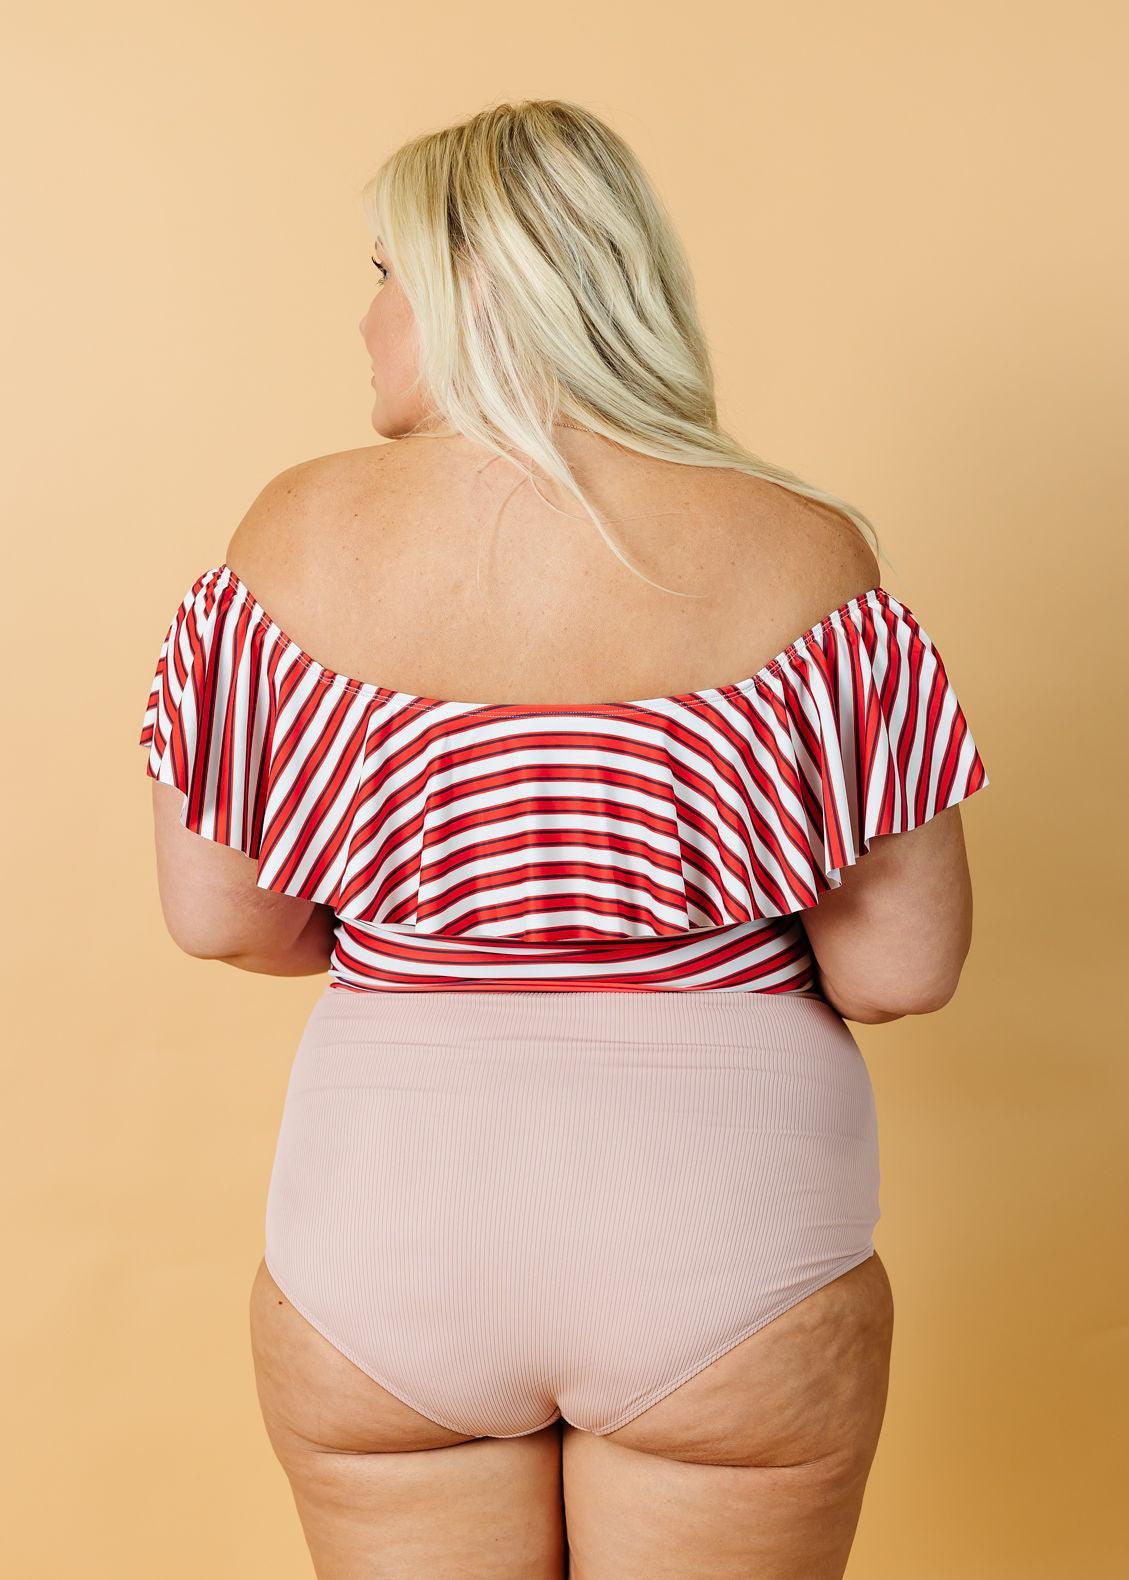 Crop Top Swimsuit - Red + Navy Stripes